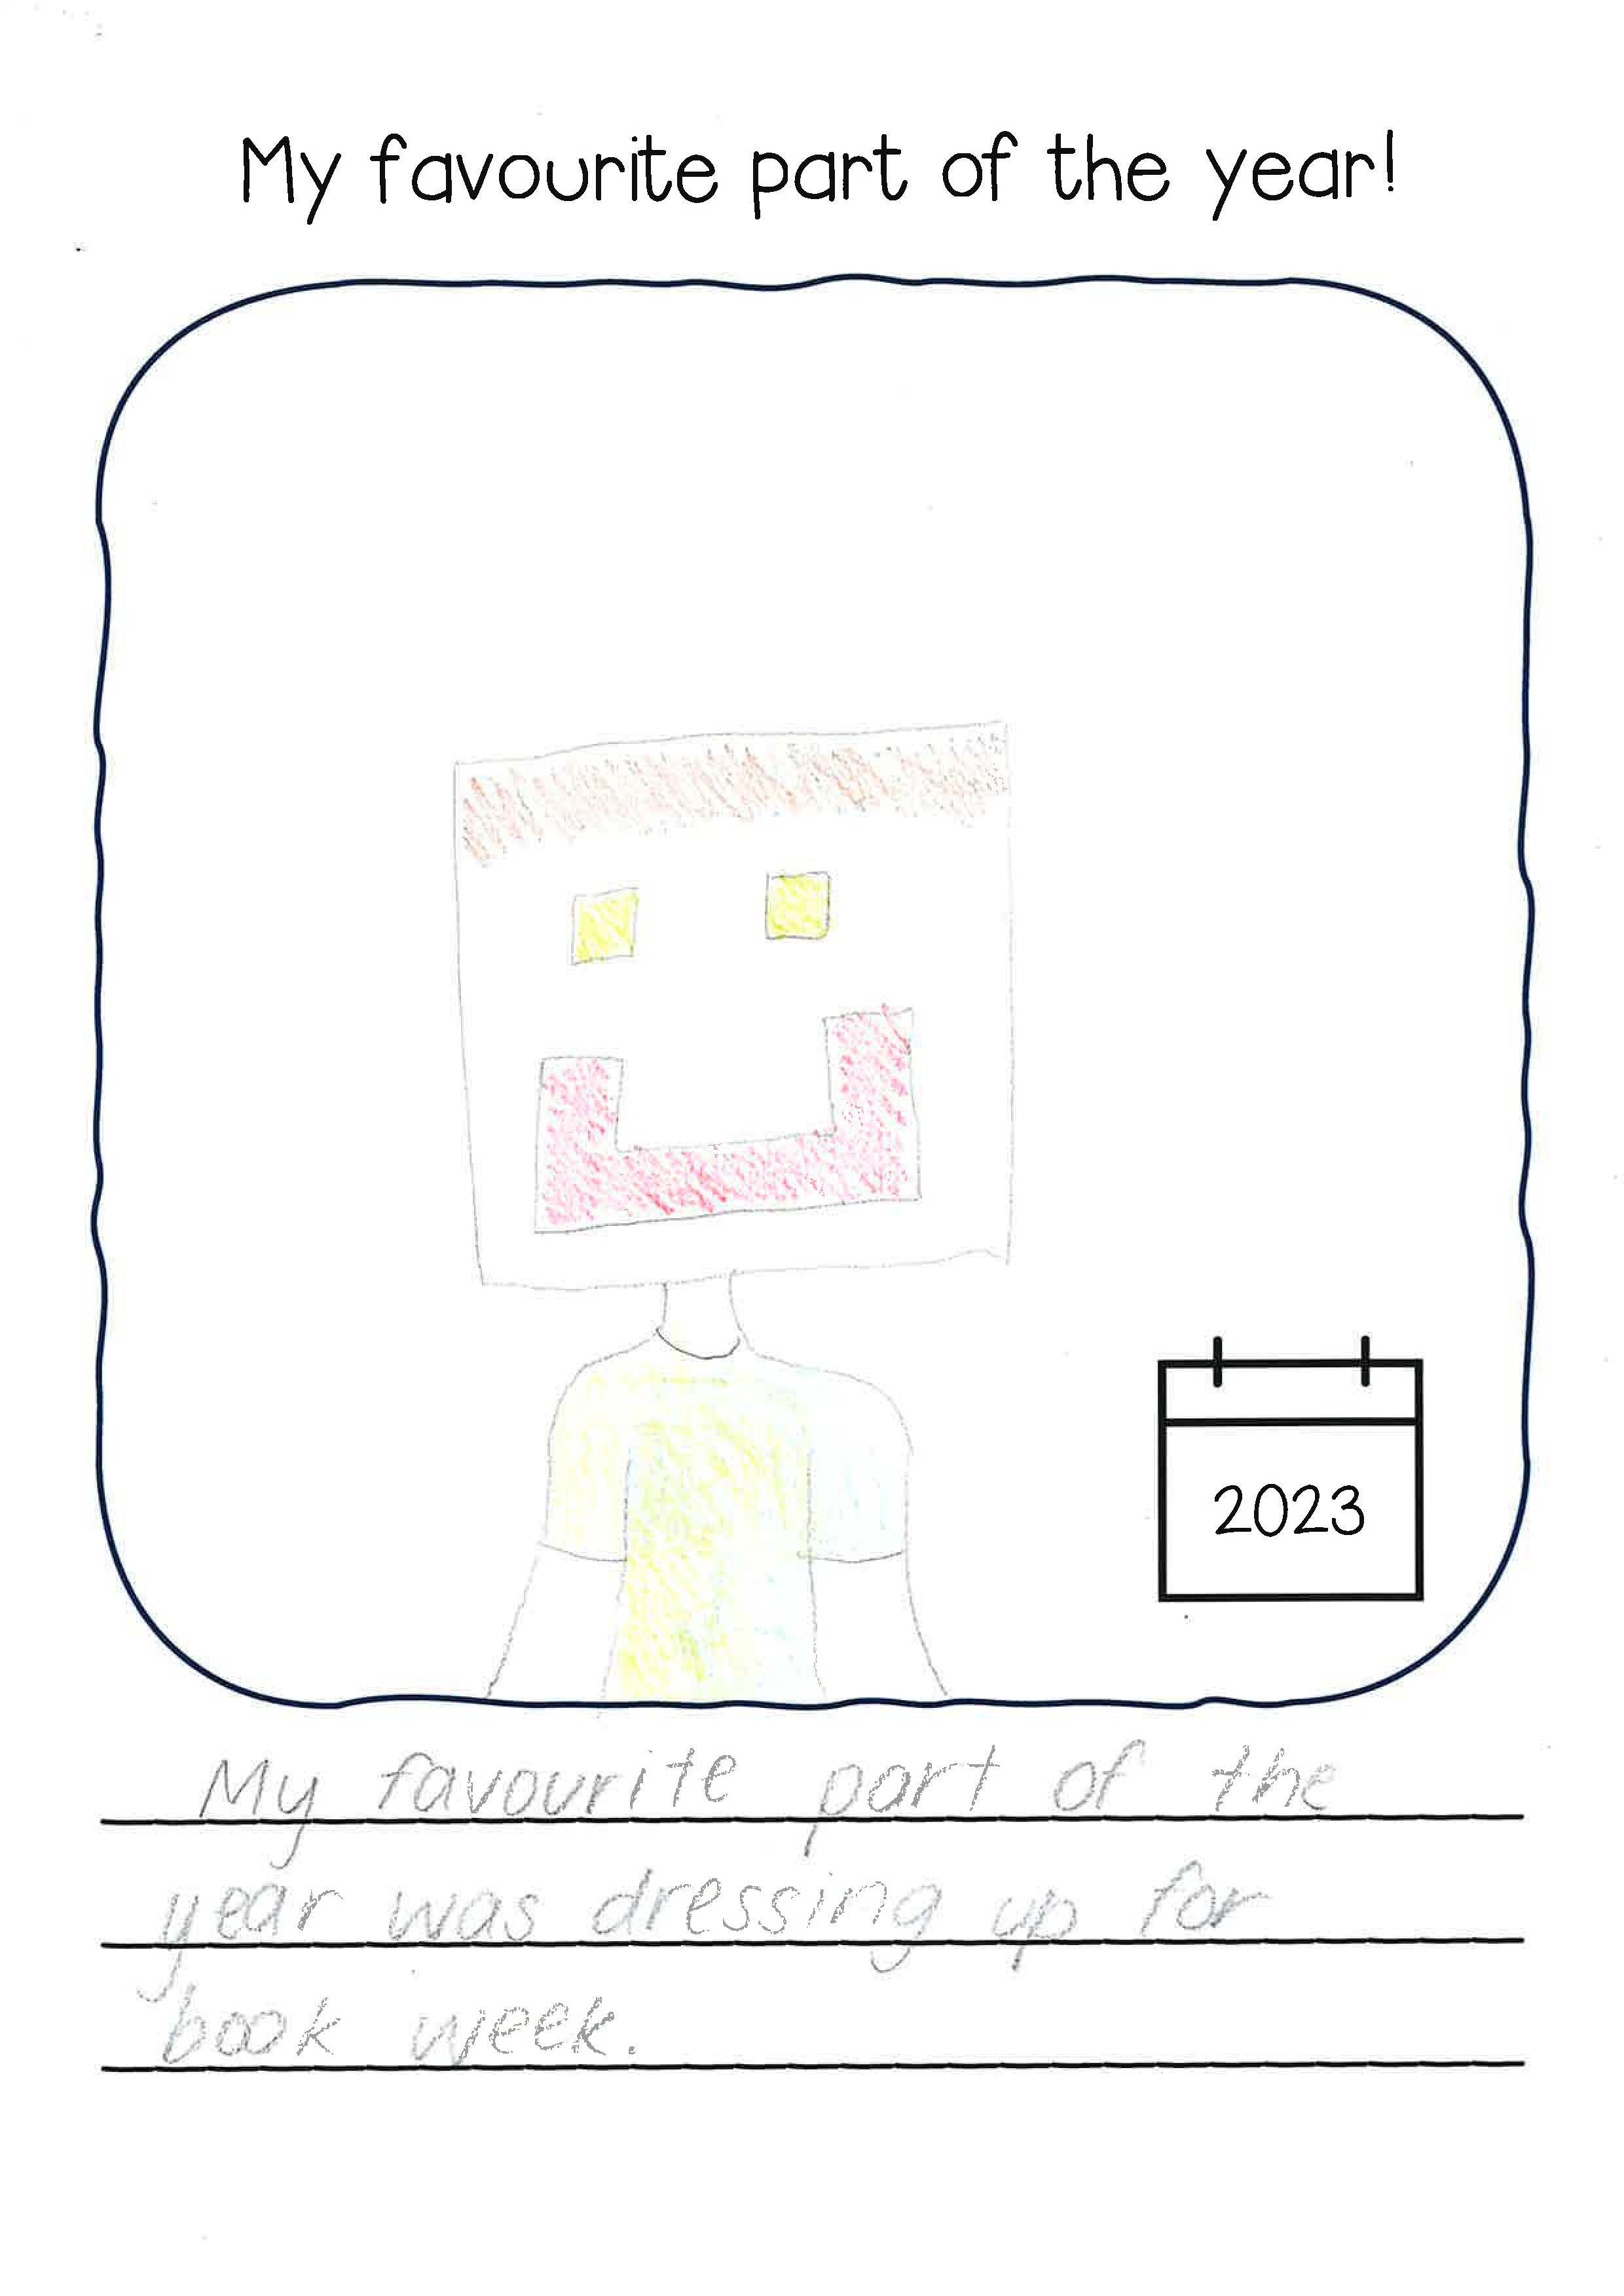 YR 1 Student's favourite parts of year one_Page_17